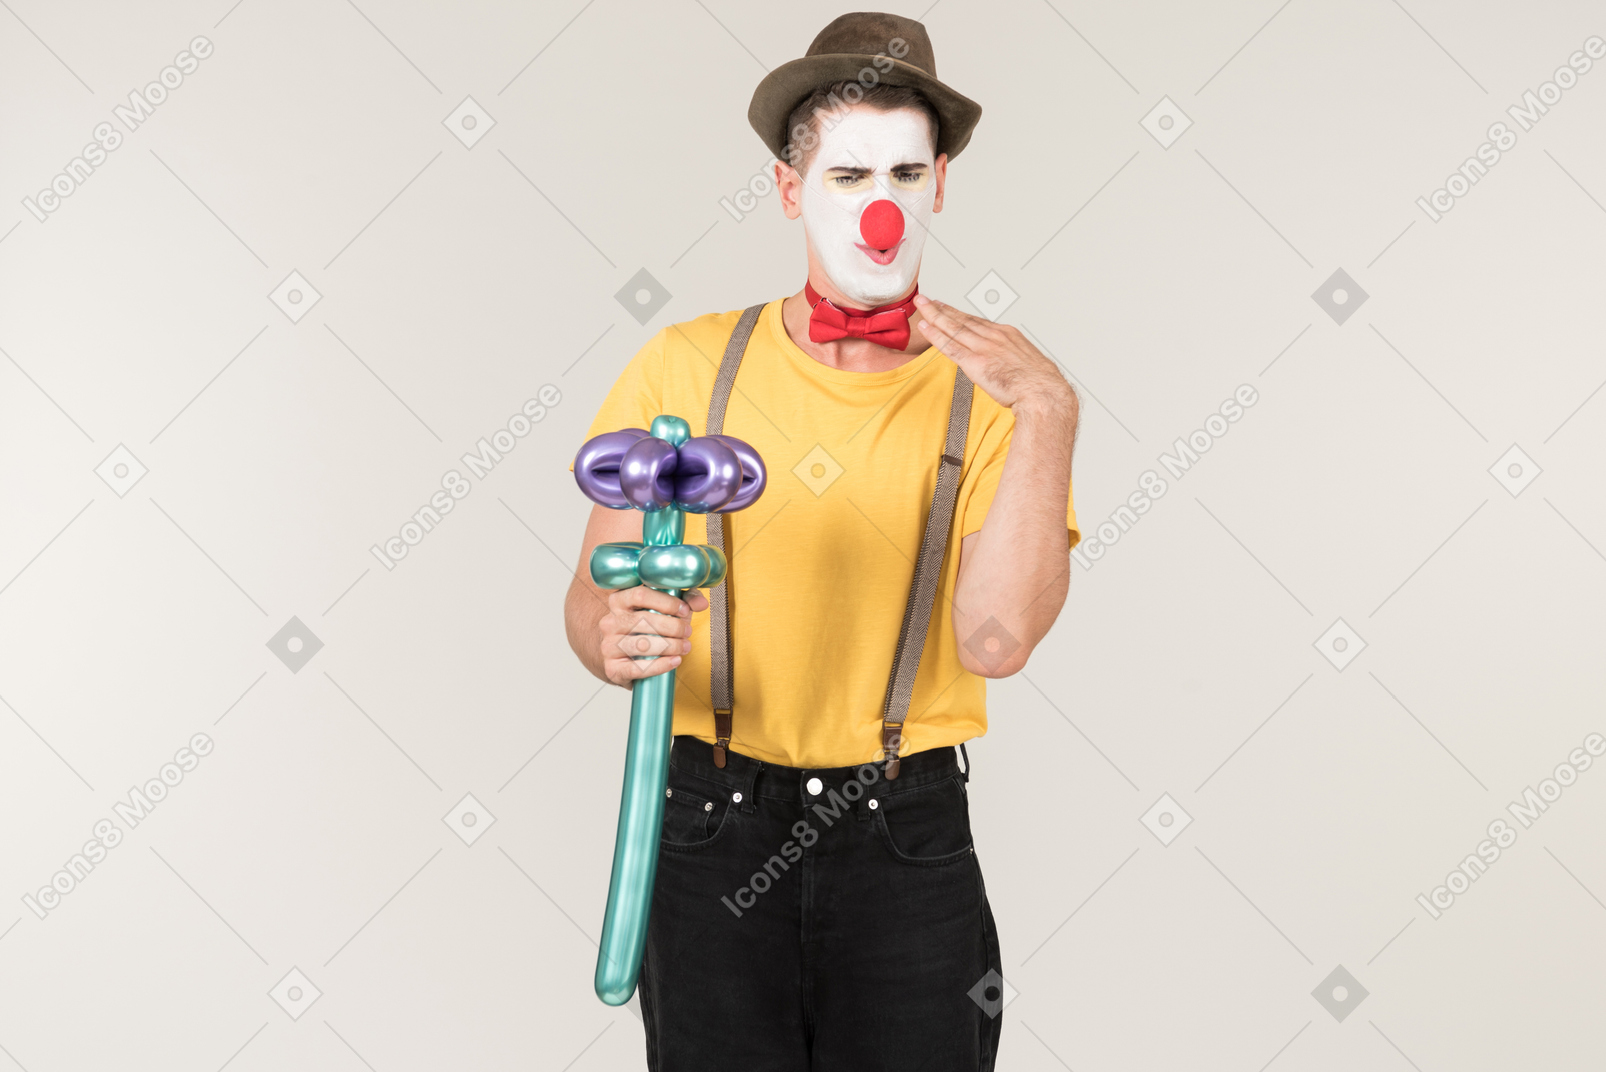 Disgusted with something male clown holding balloon flower